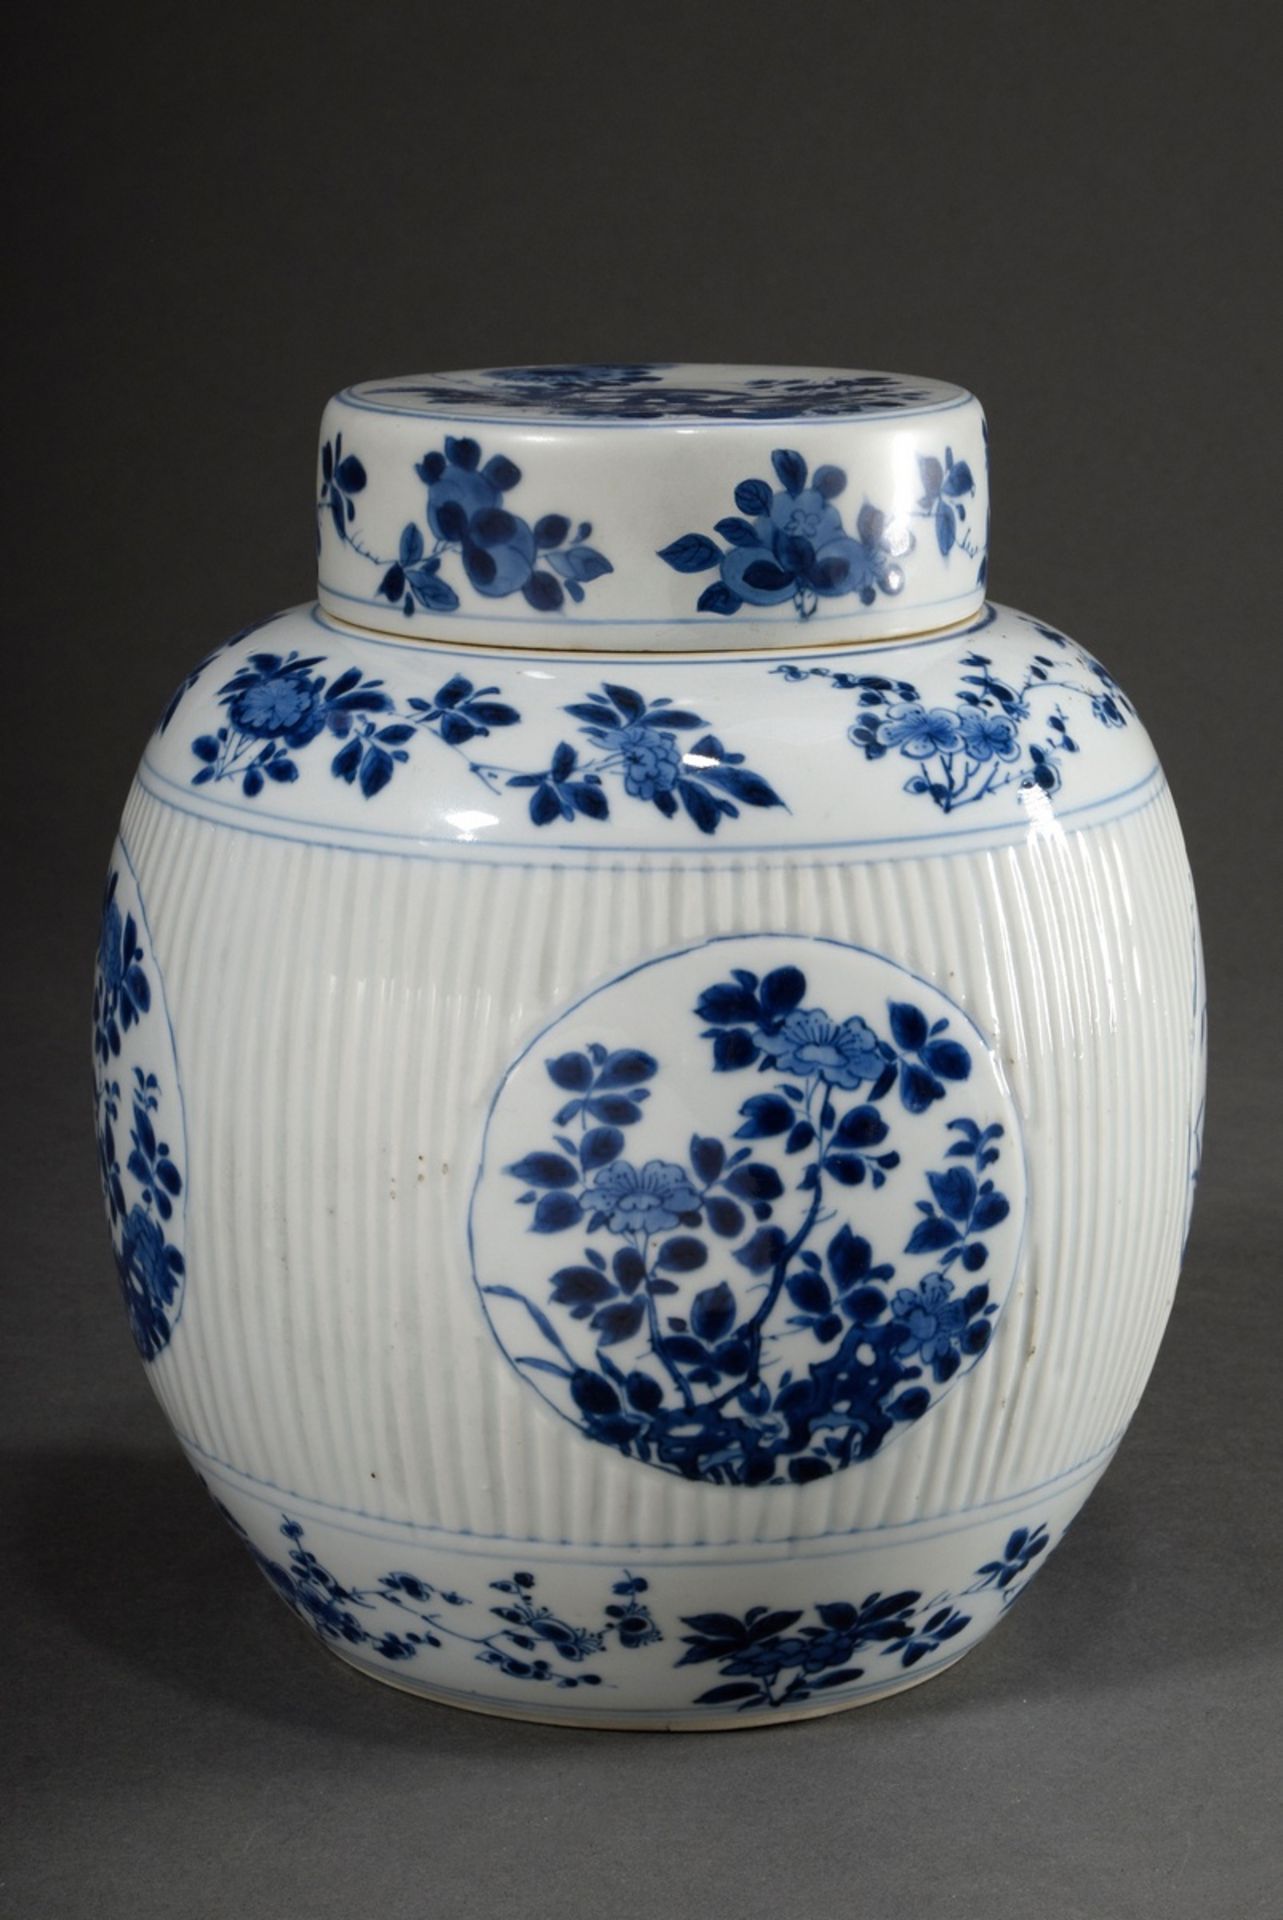 Chinese porcelain ginger pot with grooved body and floral blue painting reserves on the wall, botto - Image 2 of 5